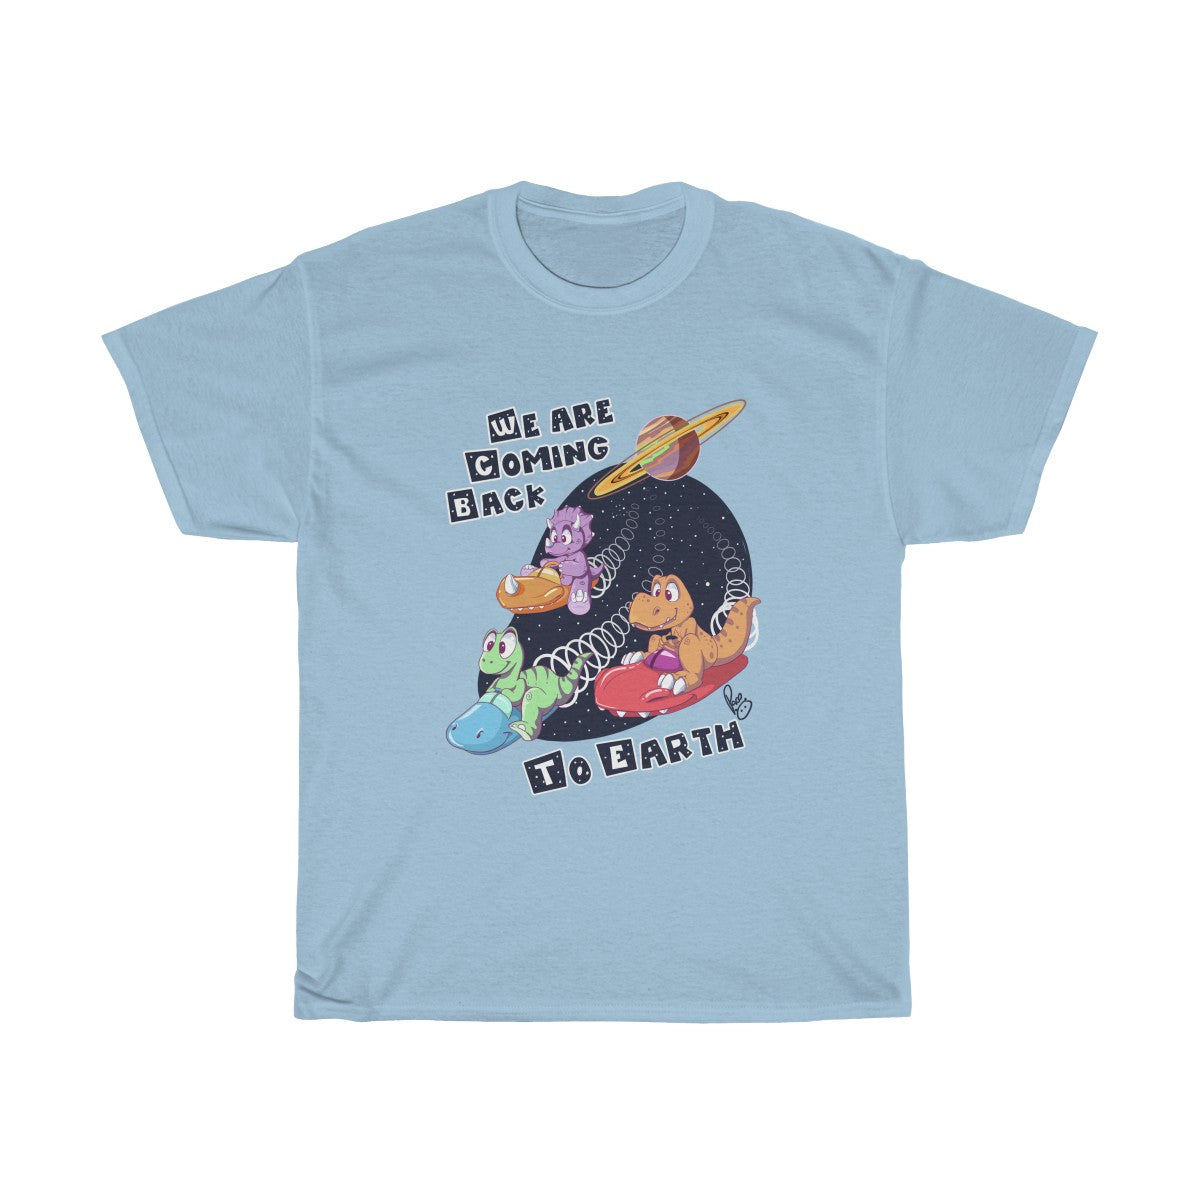 We are coming back to Earth - T-Shirt T-Shirt Paco Panda Light Blue S 